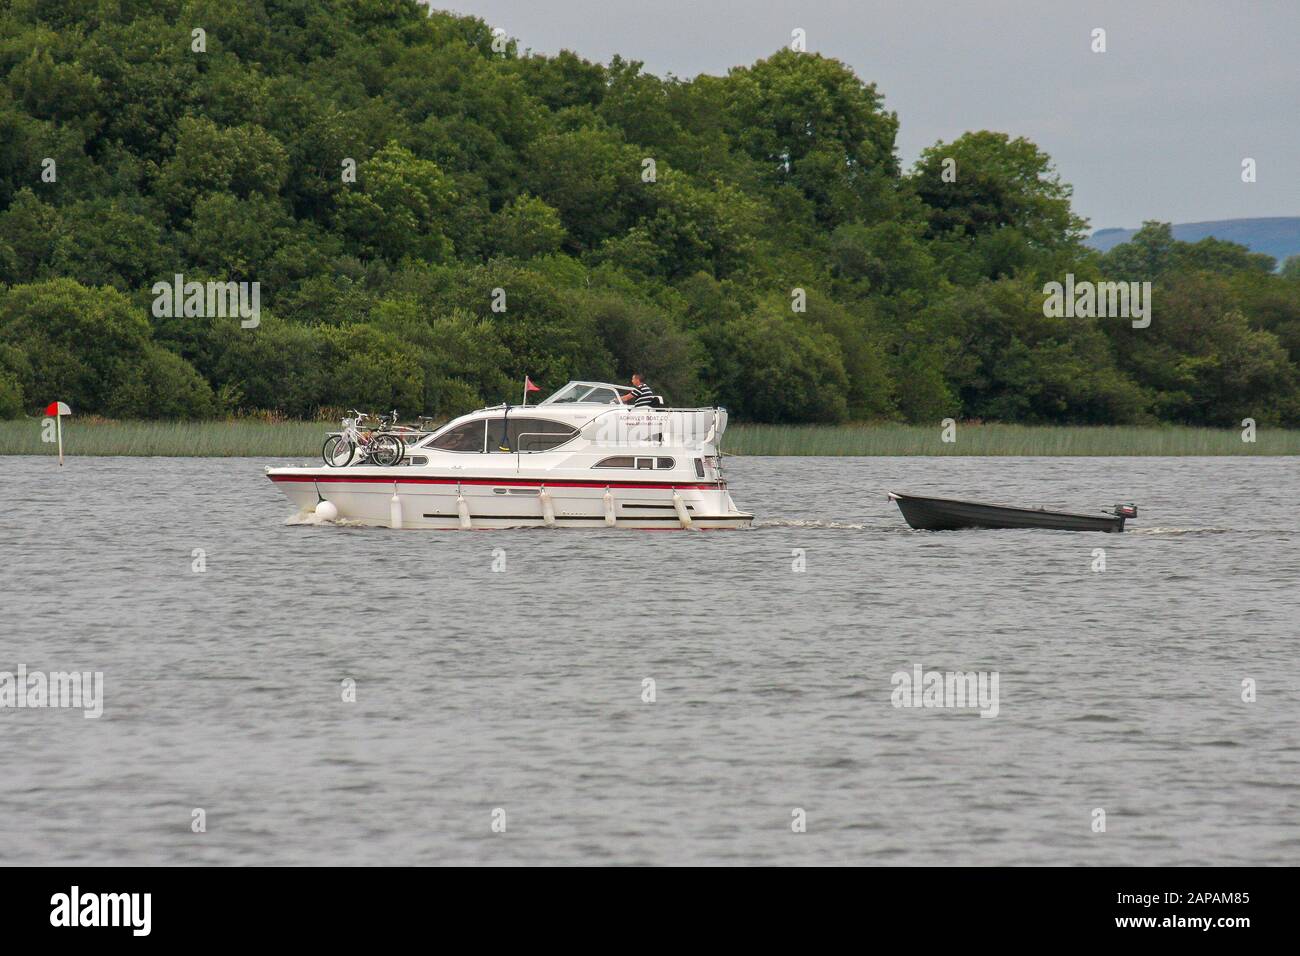 A cruising holiday on Lough Erne, Northern Ireland with an Aghinver white motor cruiser crossing the lough with bicycles onboard boat. Stock Photo